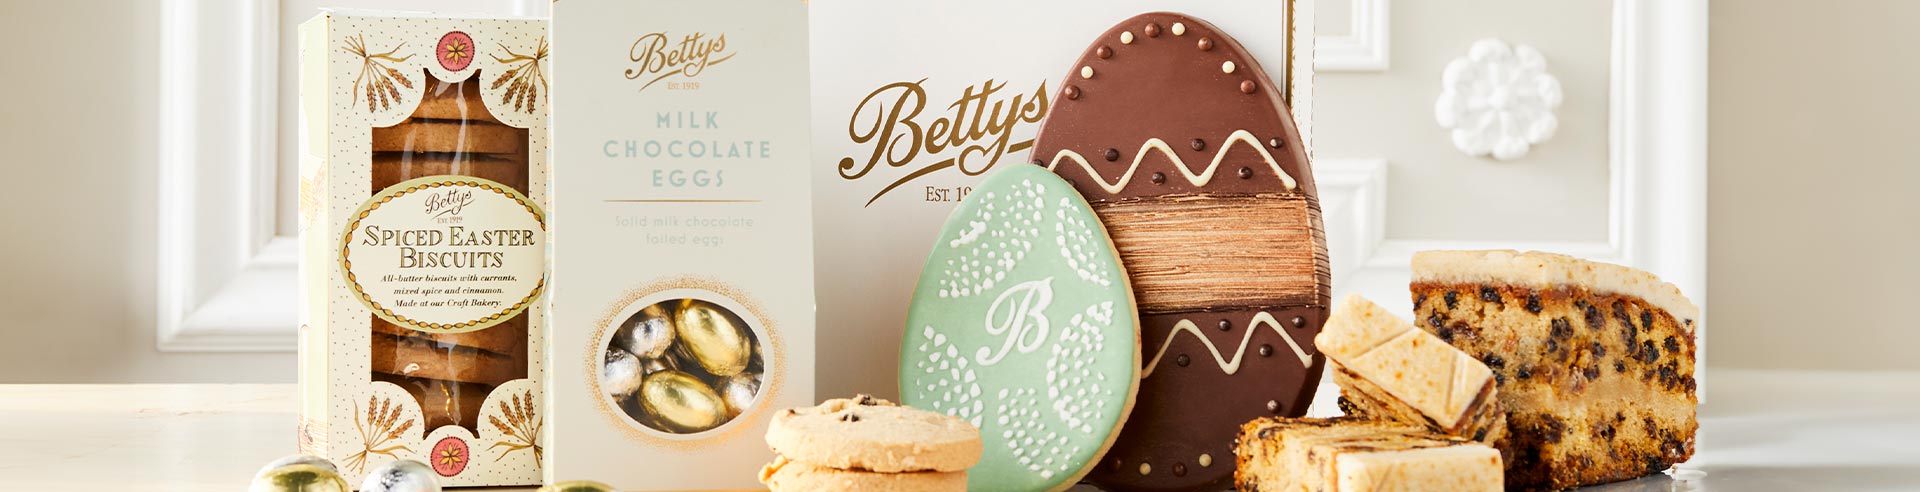 Win an Easter Specialities Gift Box